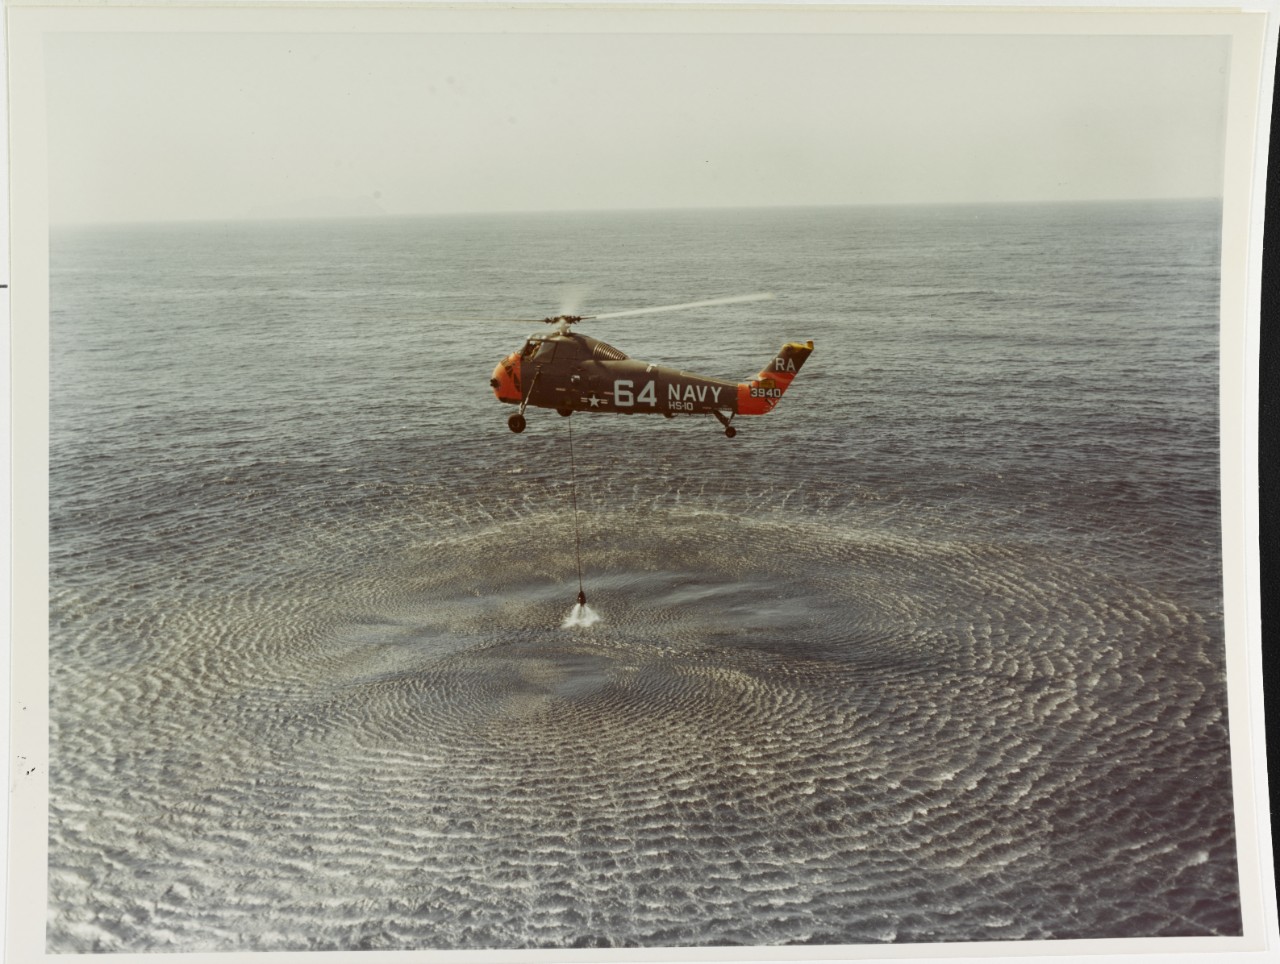 HSS-1 Helicopter operating with anti-submarine warfare equipment. February 15, 1961